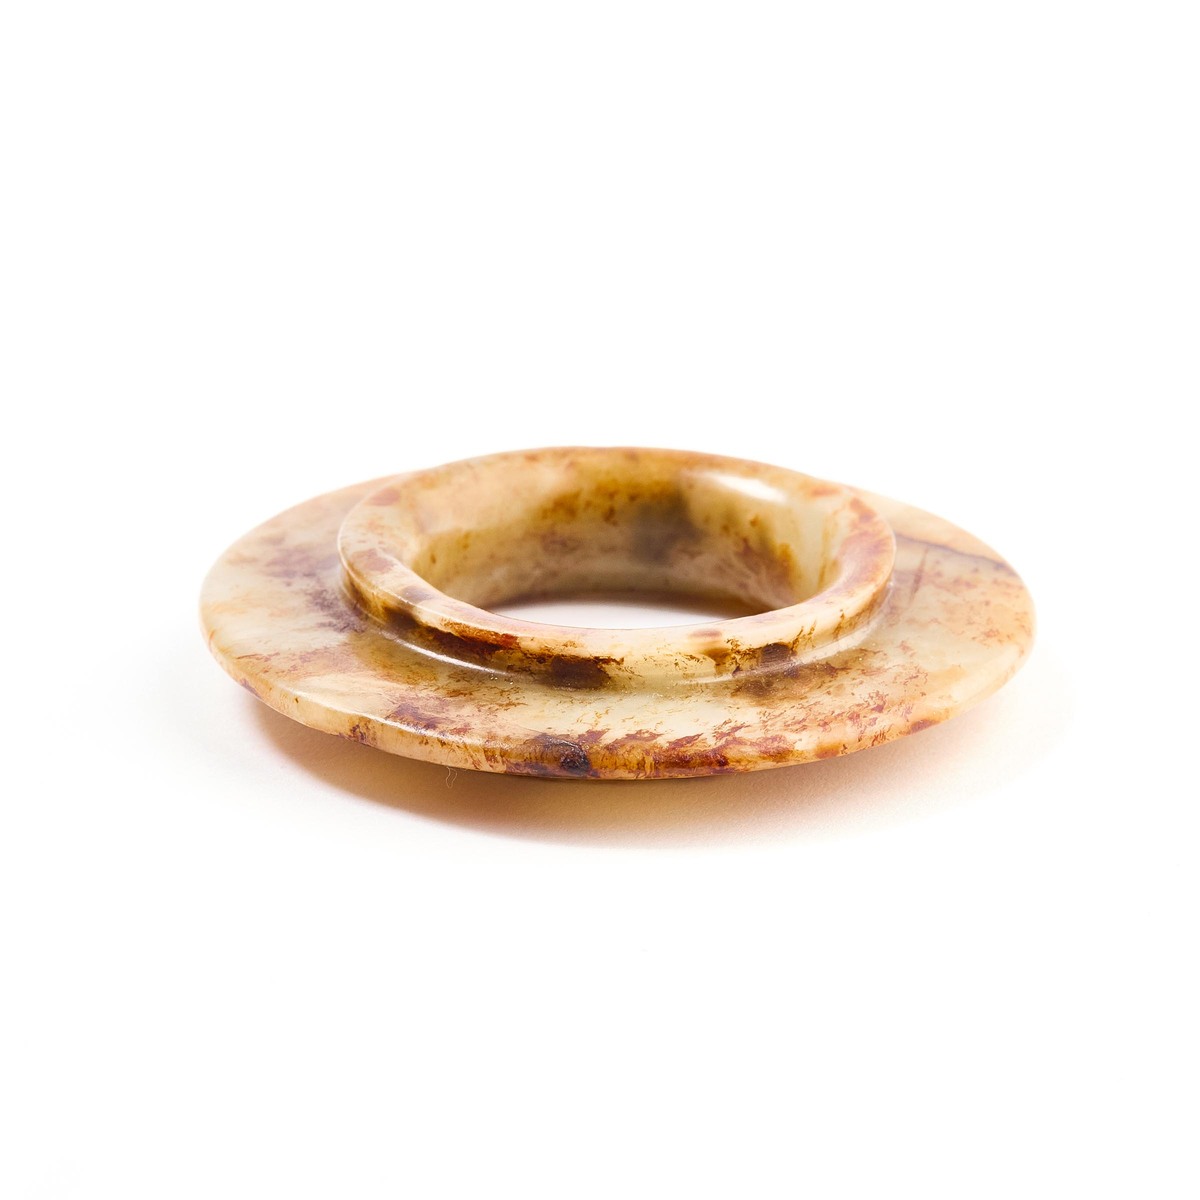 A White and Russet Jade Ring-Shaped Ornament, Song-Ming Dynasty (960-1644), 宋/明 白玉带皮凸唇环, diameter 2. - Image 5 of 7